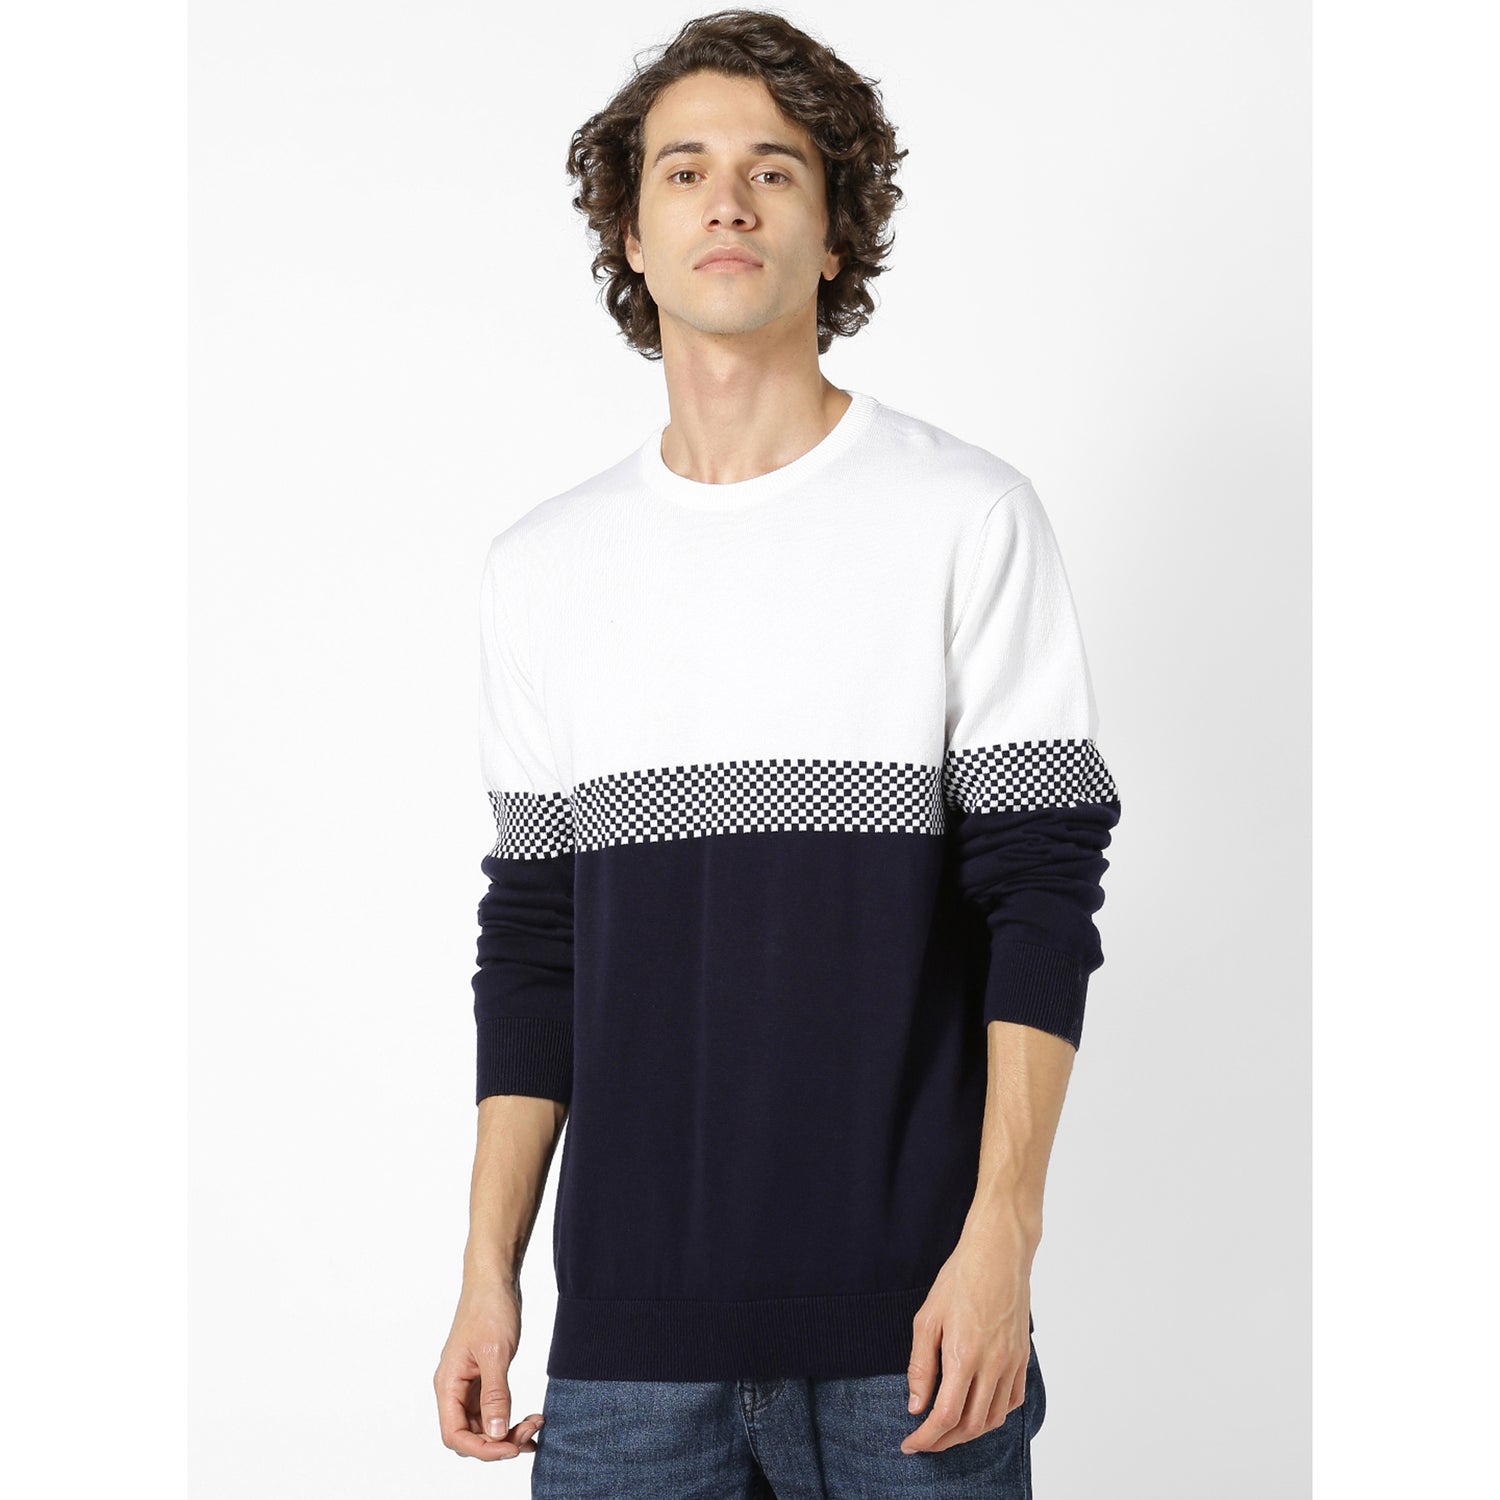 Navy Blue and White Colourblocked Pullover Sweater (SEZAG)